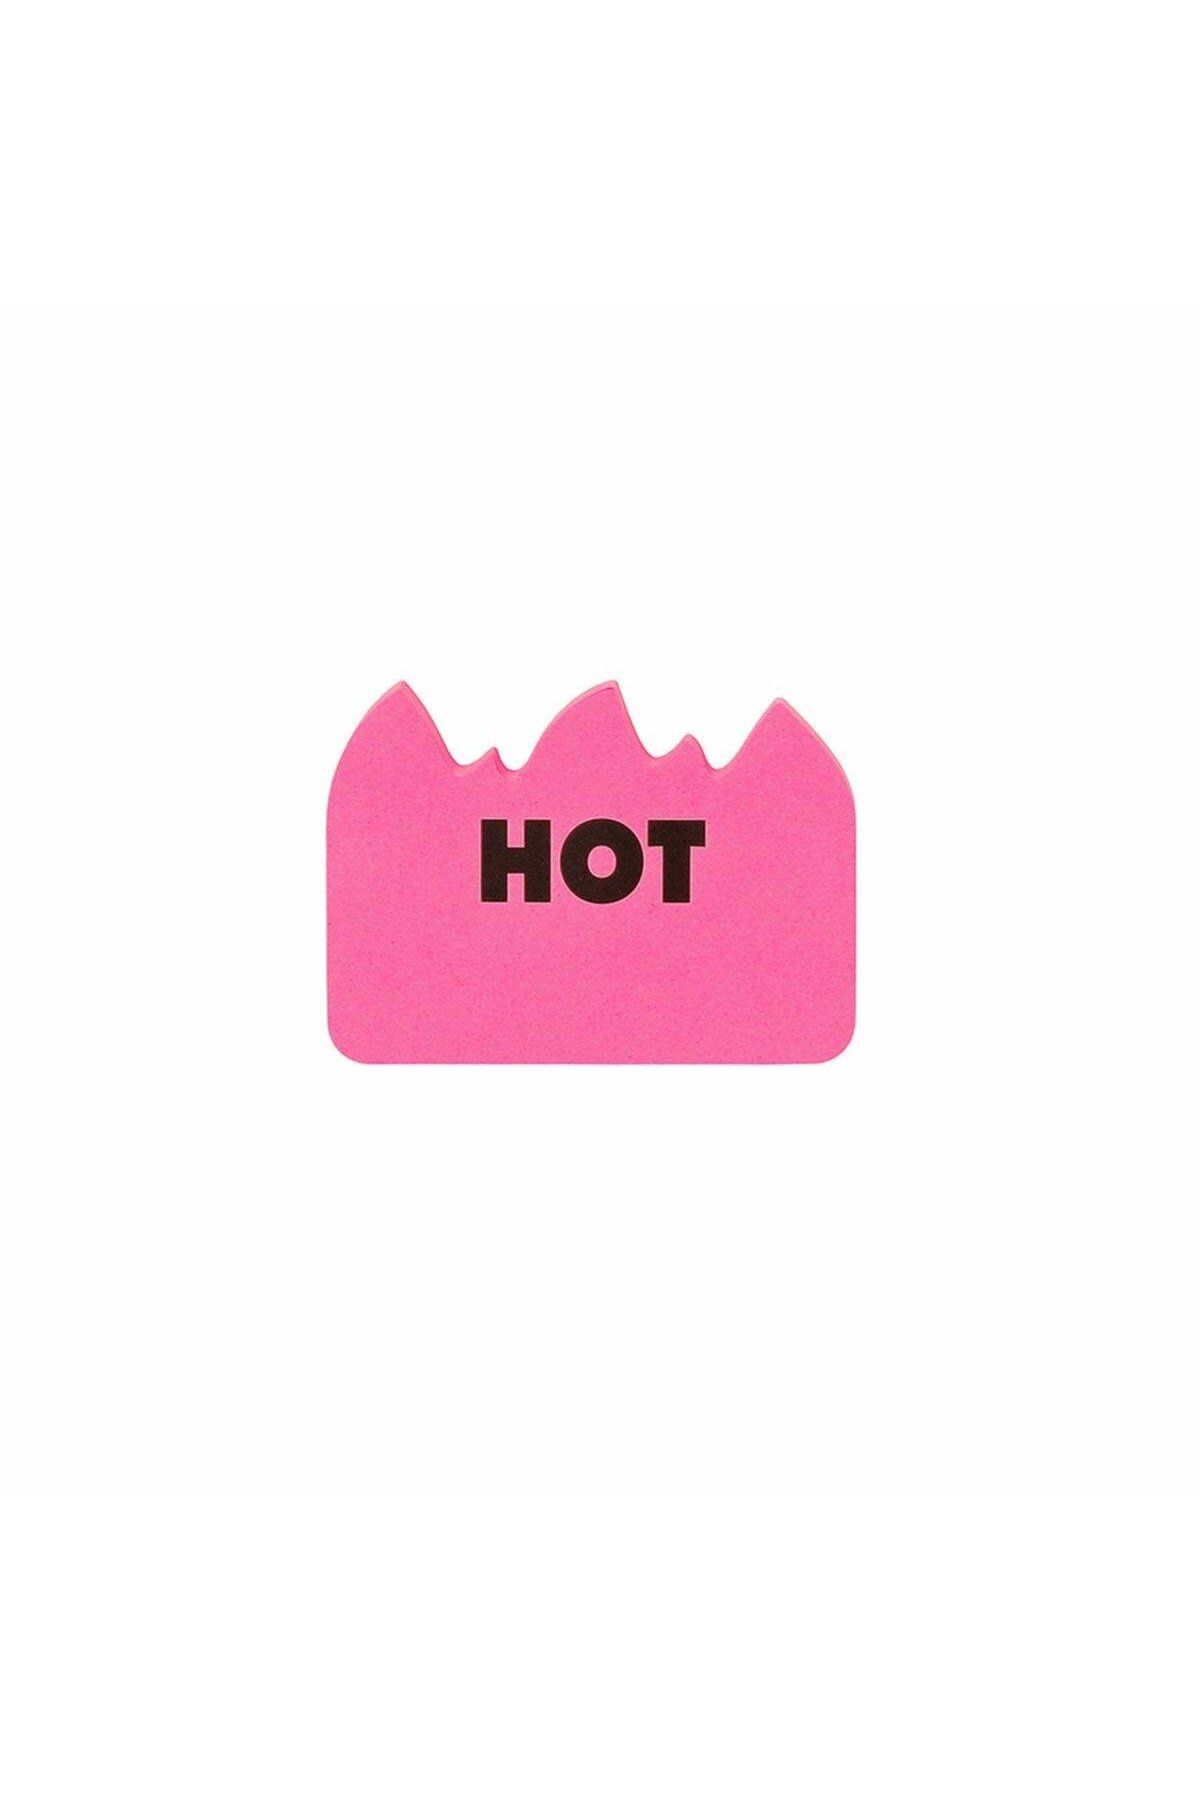 Penco Hot Flame Sticky Note Post It Pembe